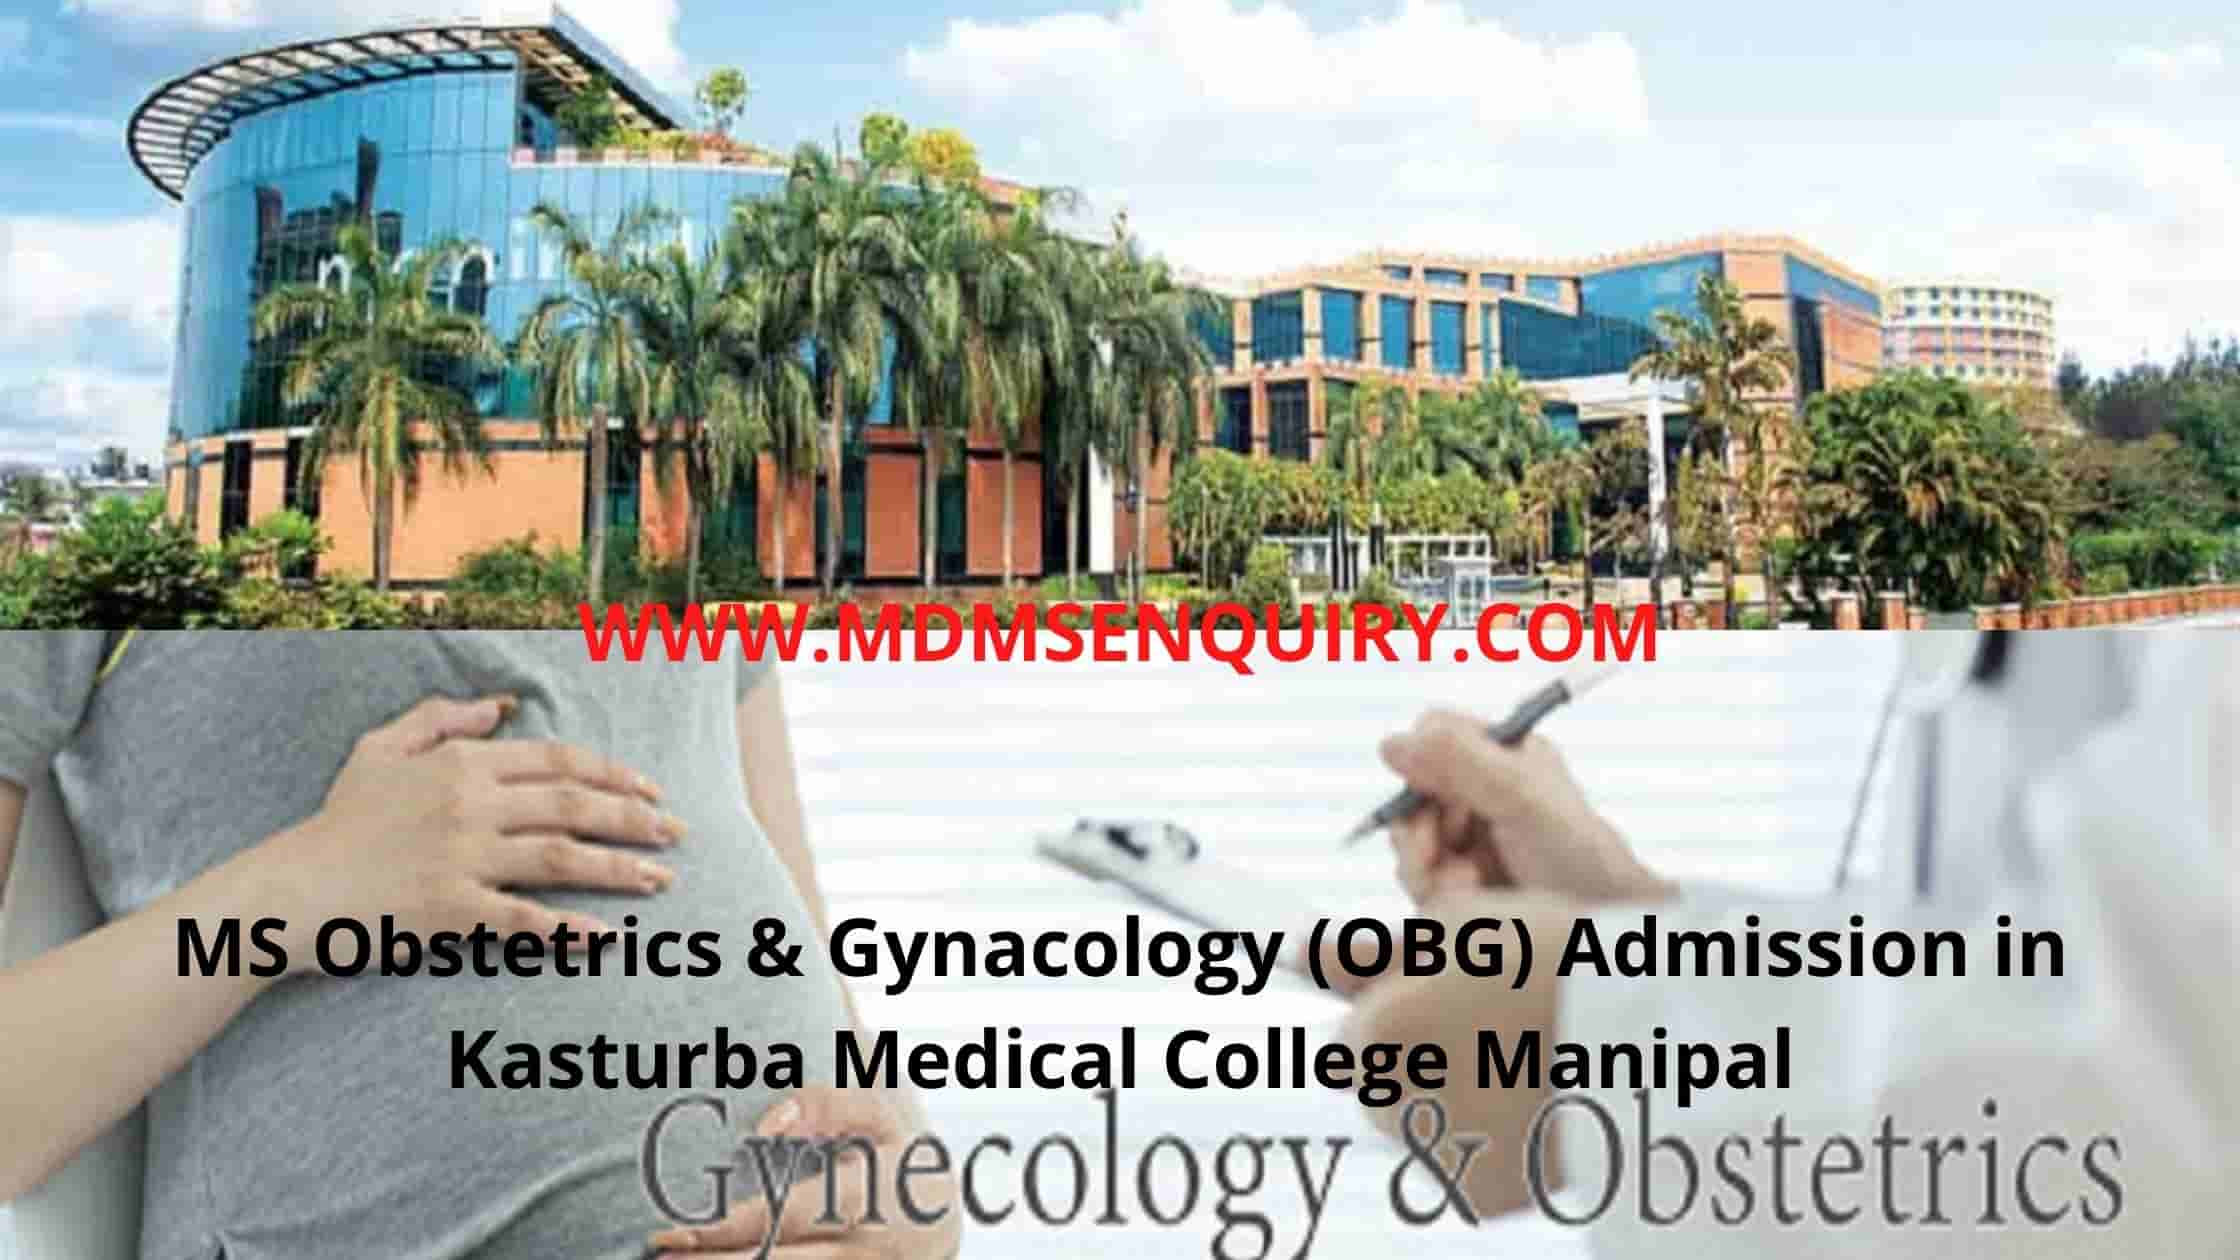 MS Obstetrics & Gynacology (OBG) admission in Kasturba Medical College Manipal